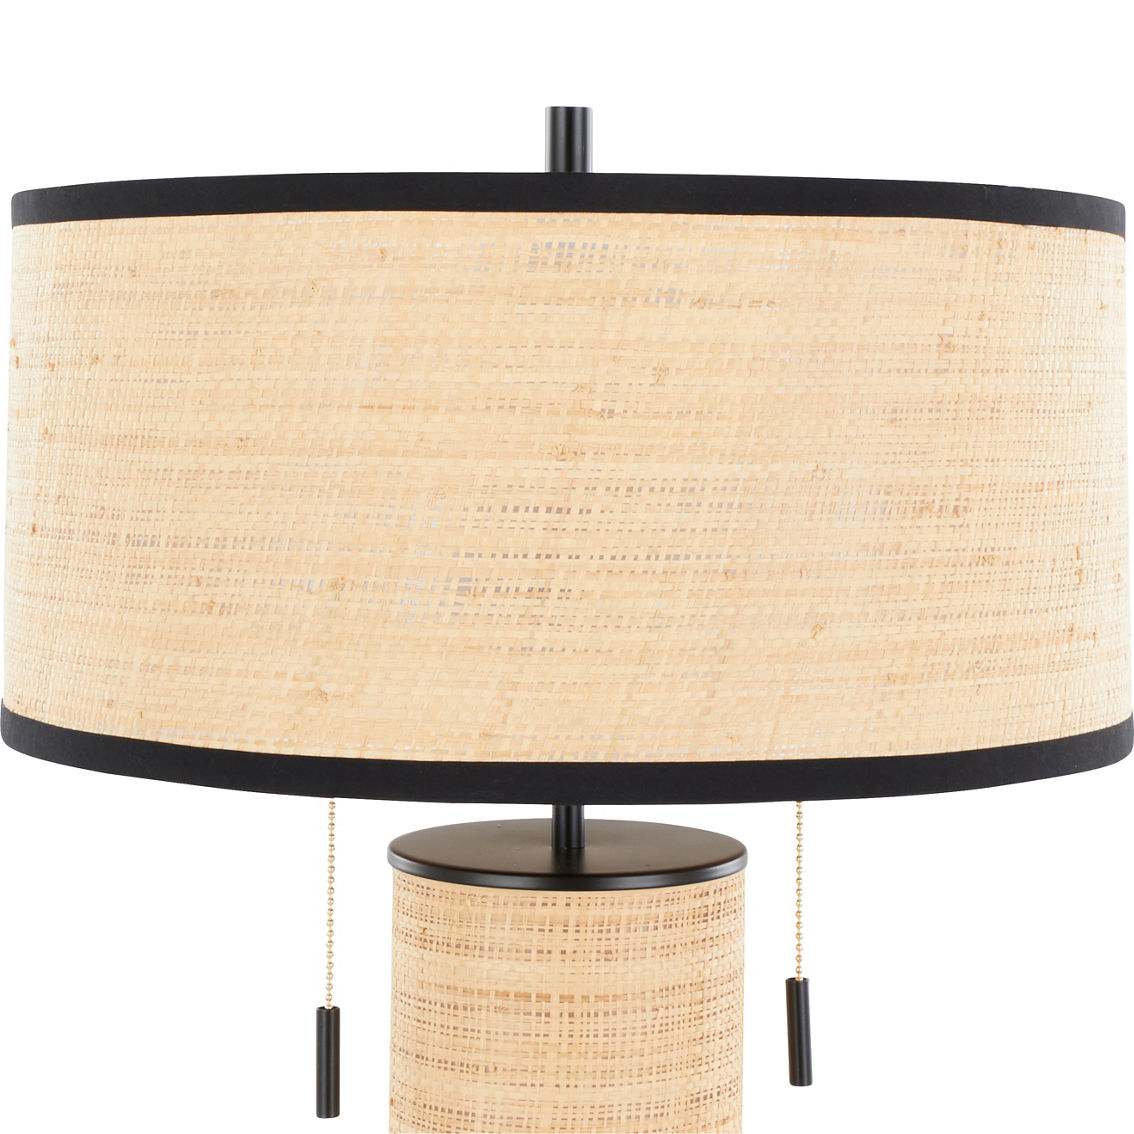 LumiSource Cylinder Rattan 29 in. Table Lamp - Image 3 of 6